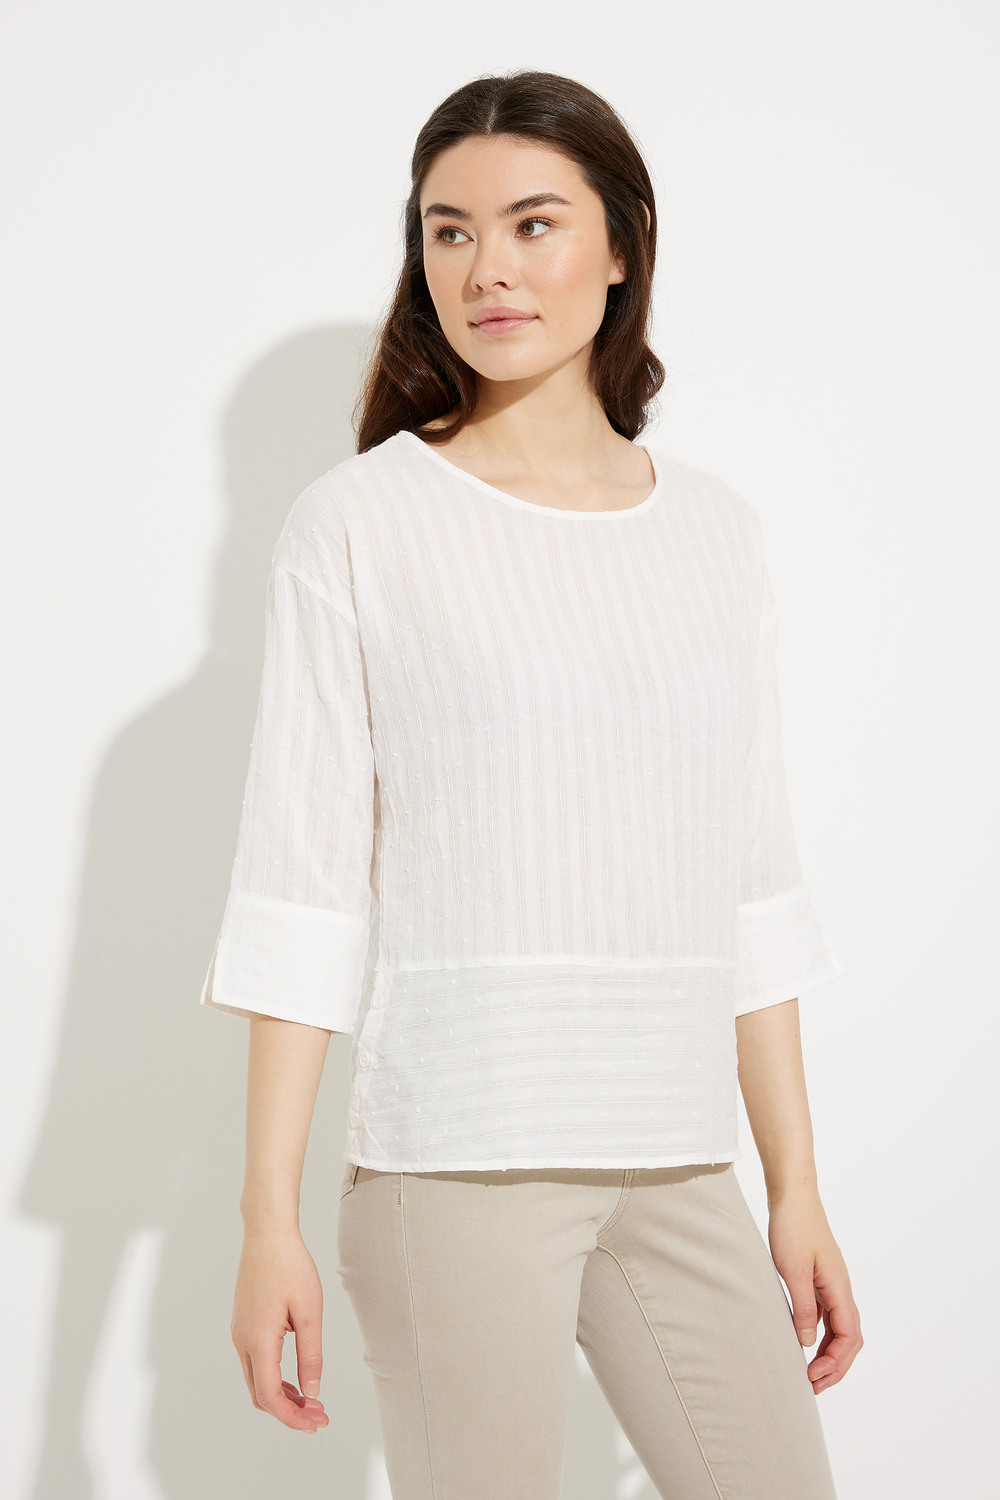 Textured Boat Neck Blouse Style A41095. White